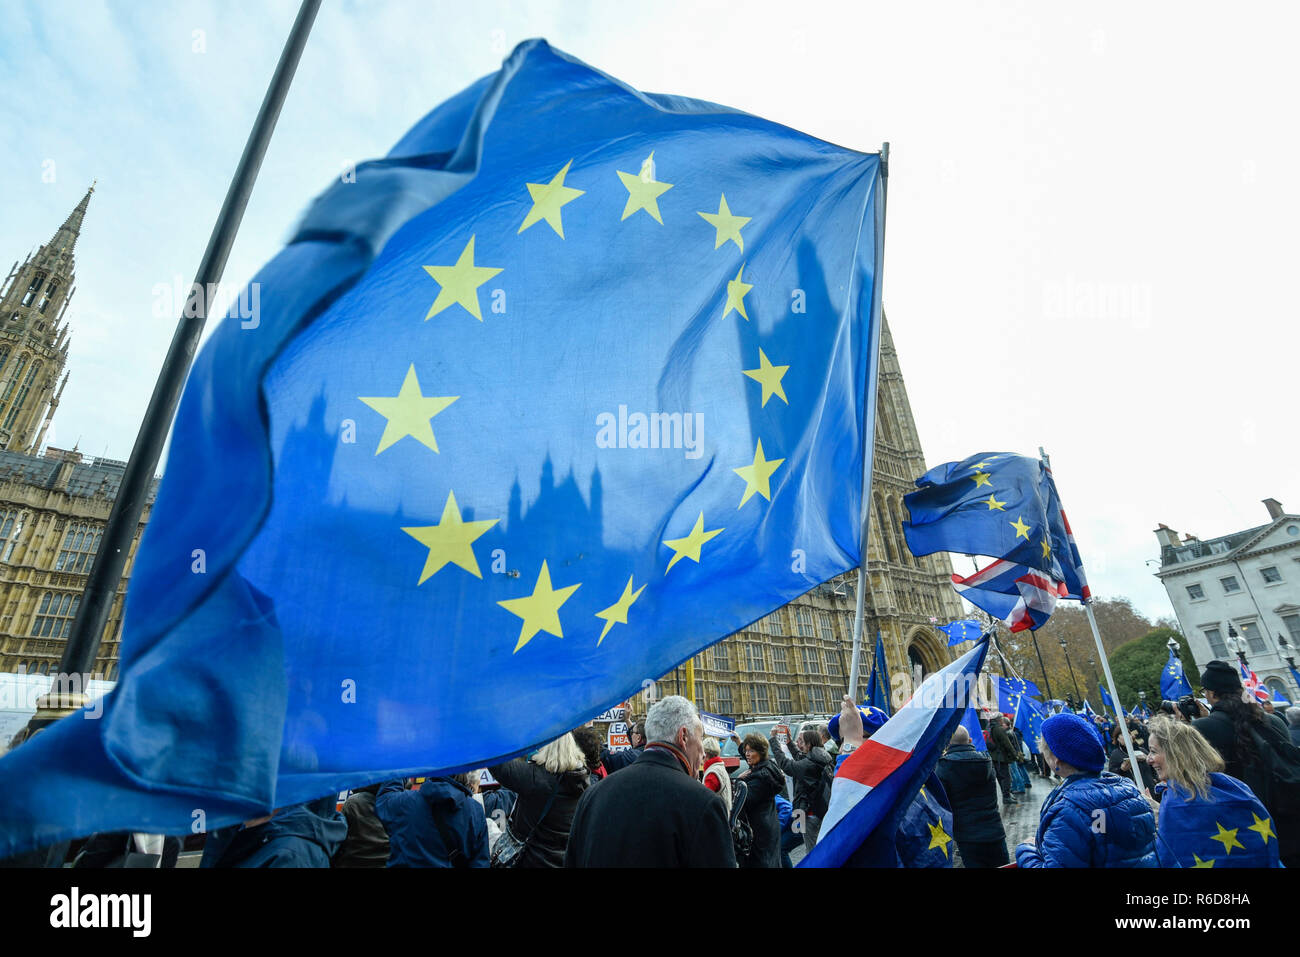 London, UK.  5 December 2018.  European flags held aloft by anti-Brexit supporters demonstrating outside the Houses of Parliament.  MPs are debating Theresa May's Brexit deal with the European Union ahead of the meaningful vote of December 11.  Credit: Stephen Chung / Alamy Live News Stock Photo